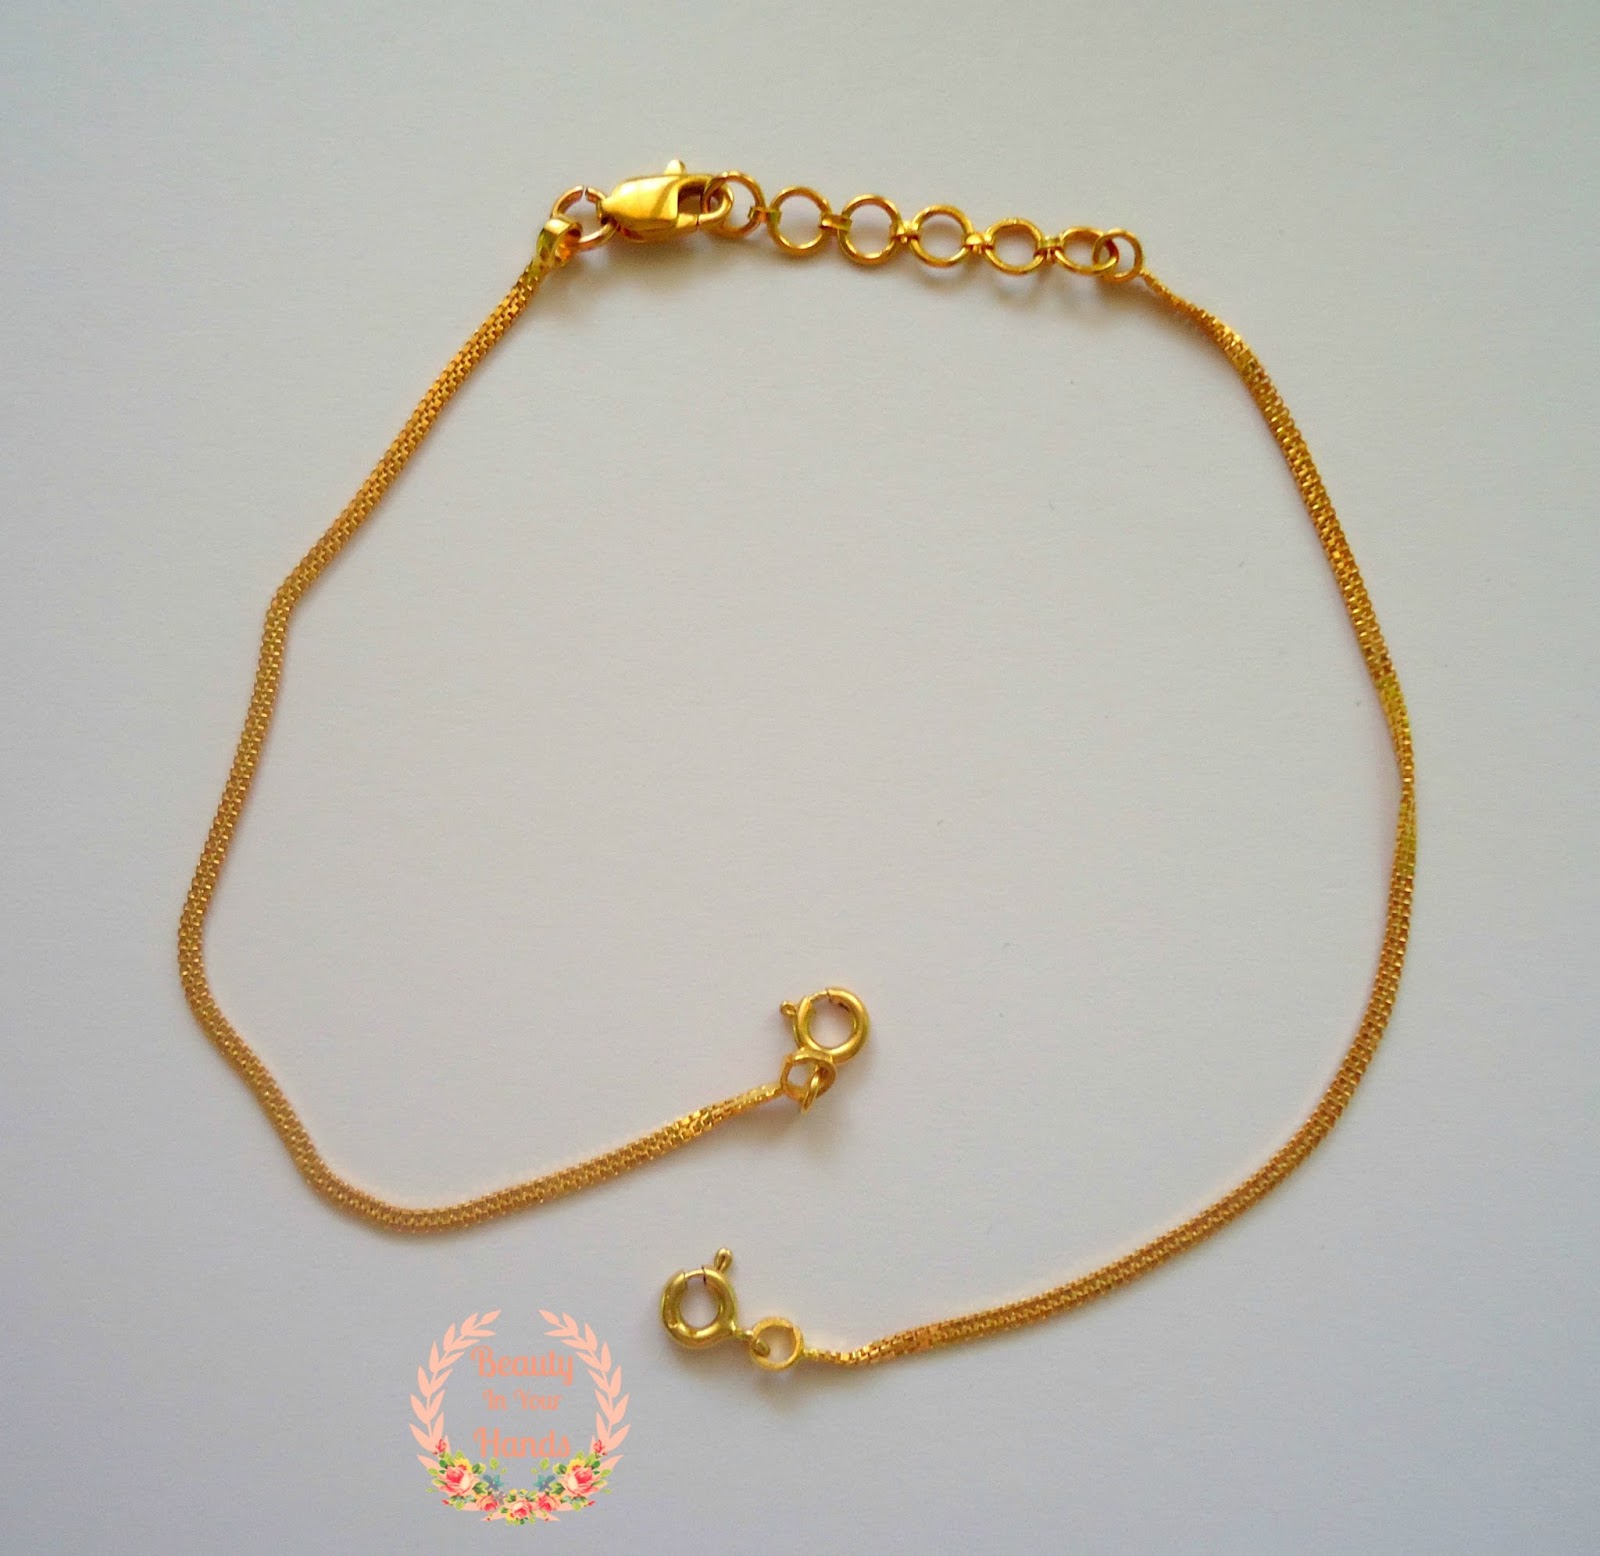 Beauty In Your Hands: How to turn a bracelet into a necklace